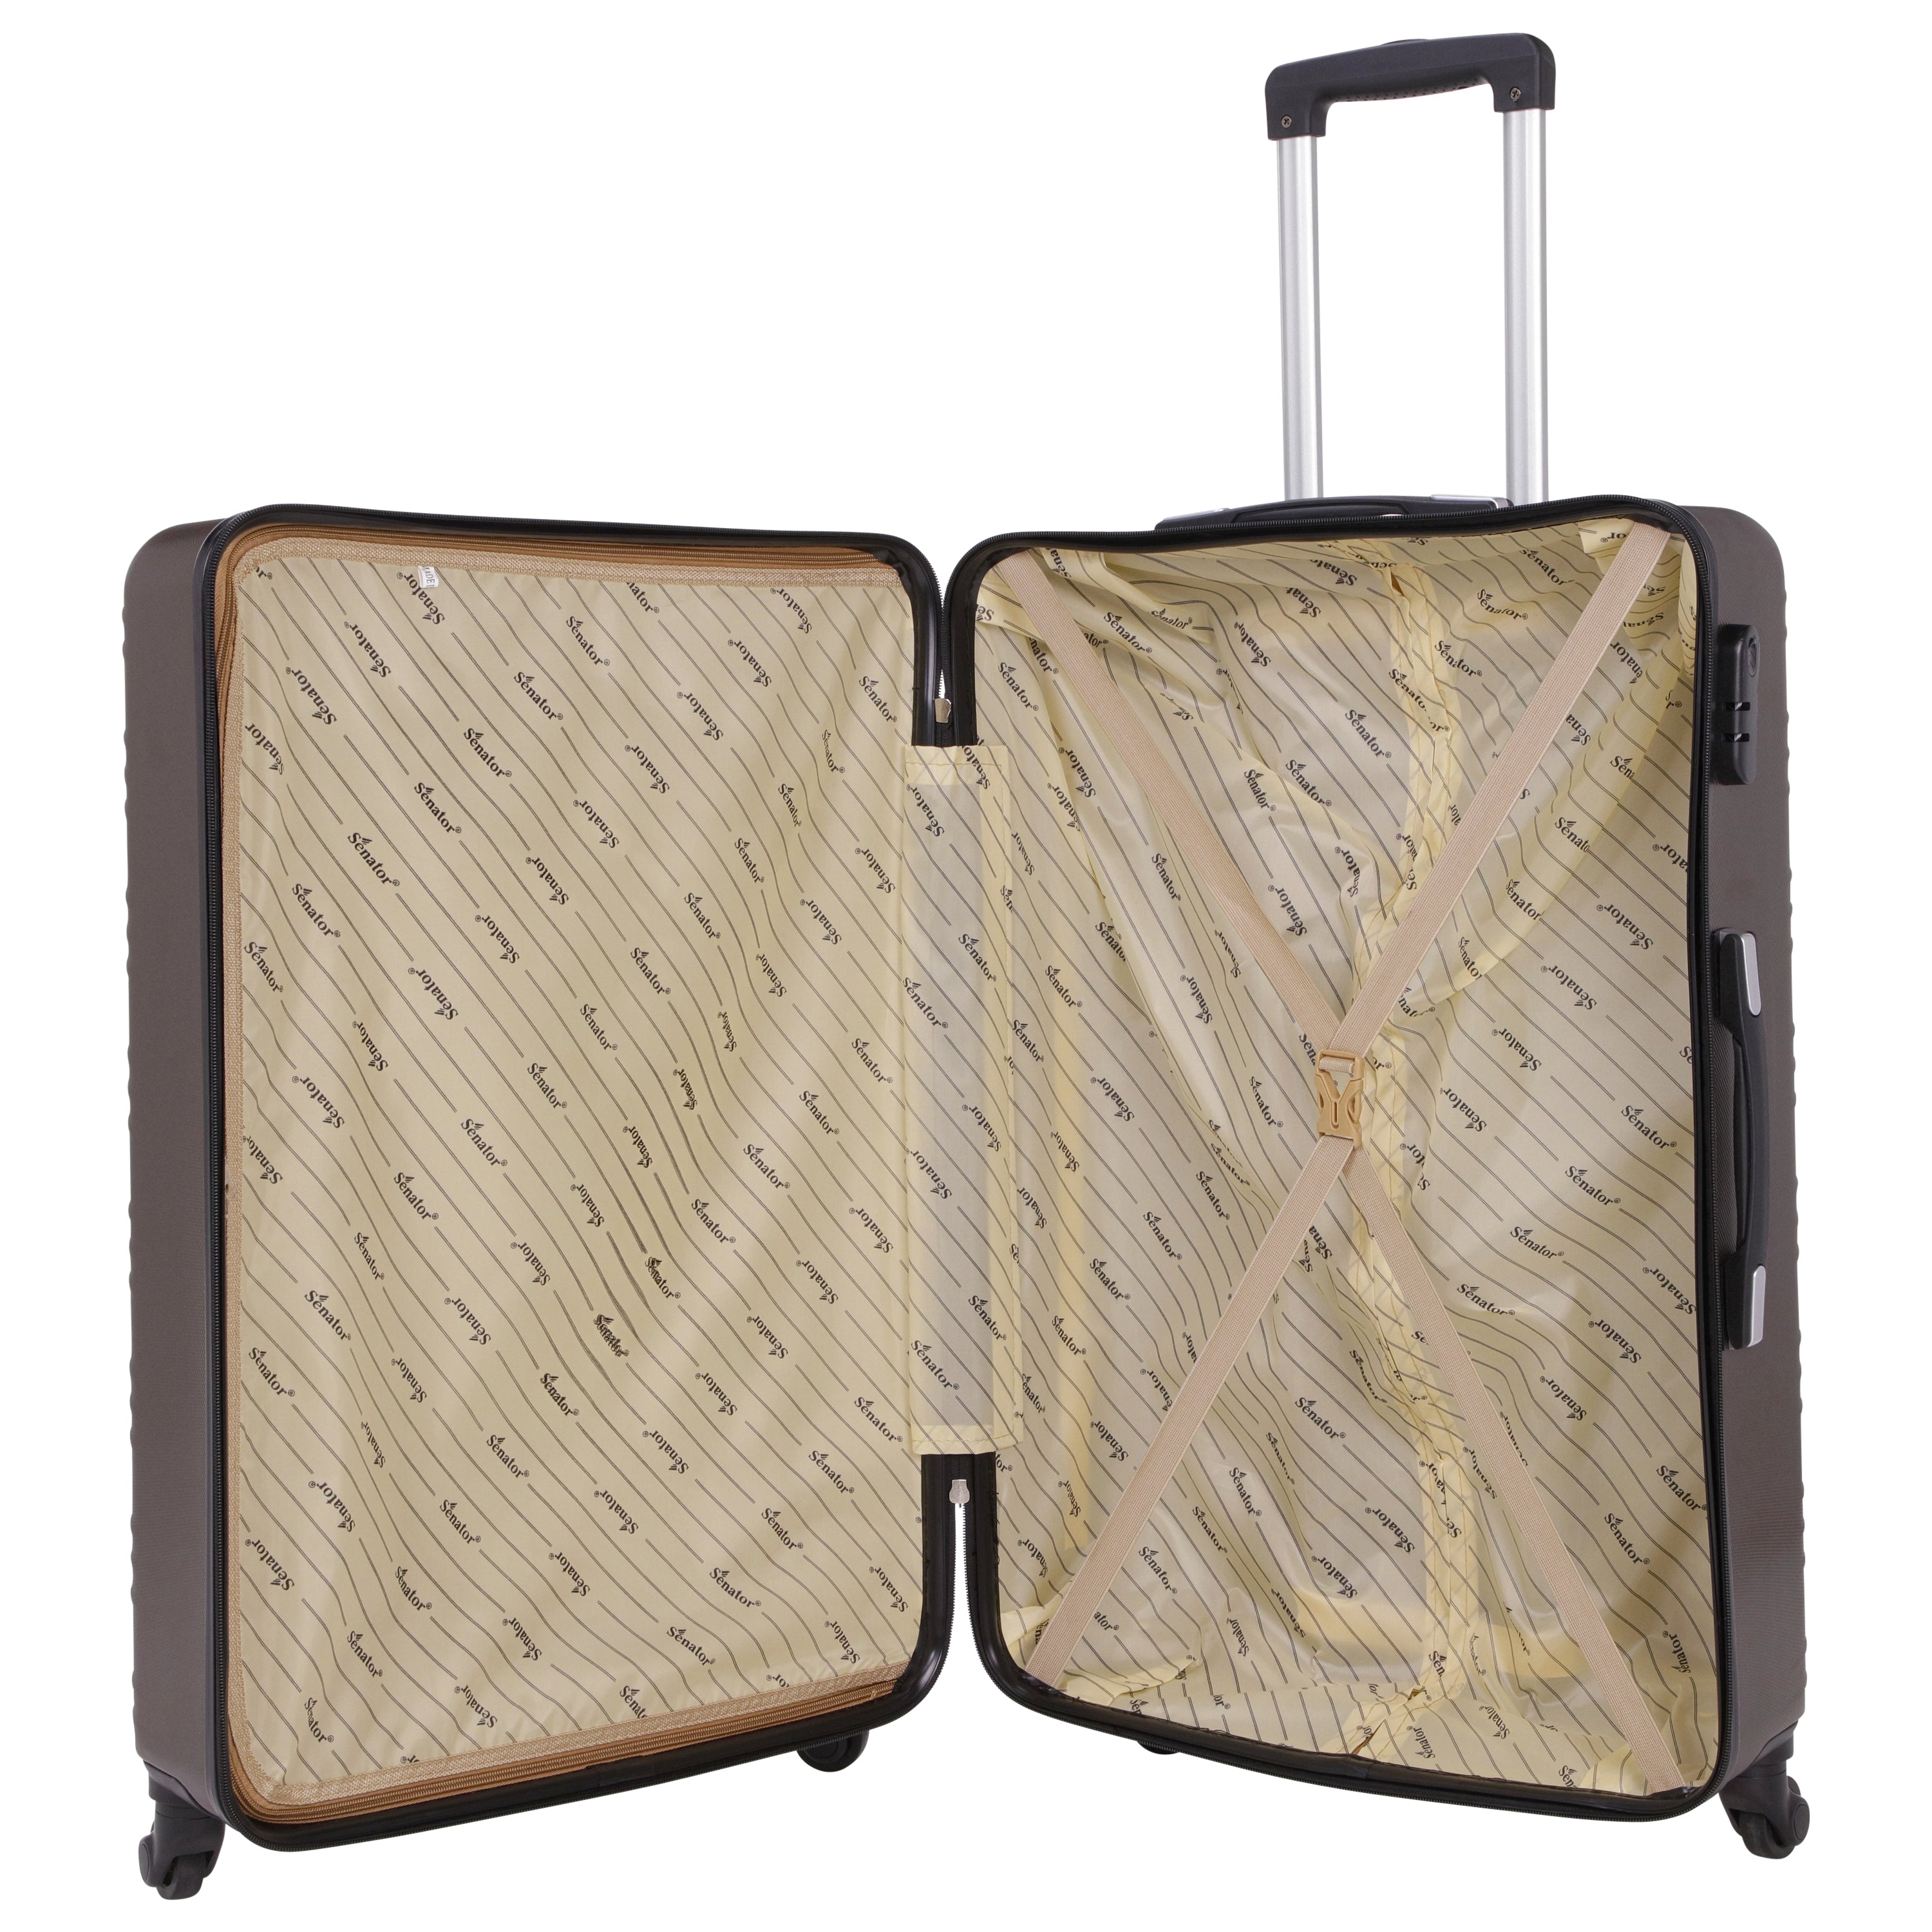 Carry-on luggage for airport  by Senator (KH9022-20) - buyluggageonline